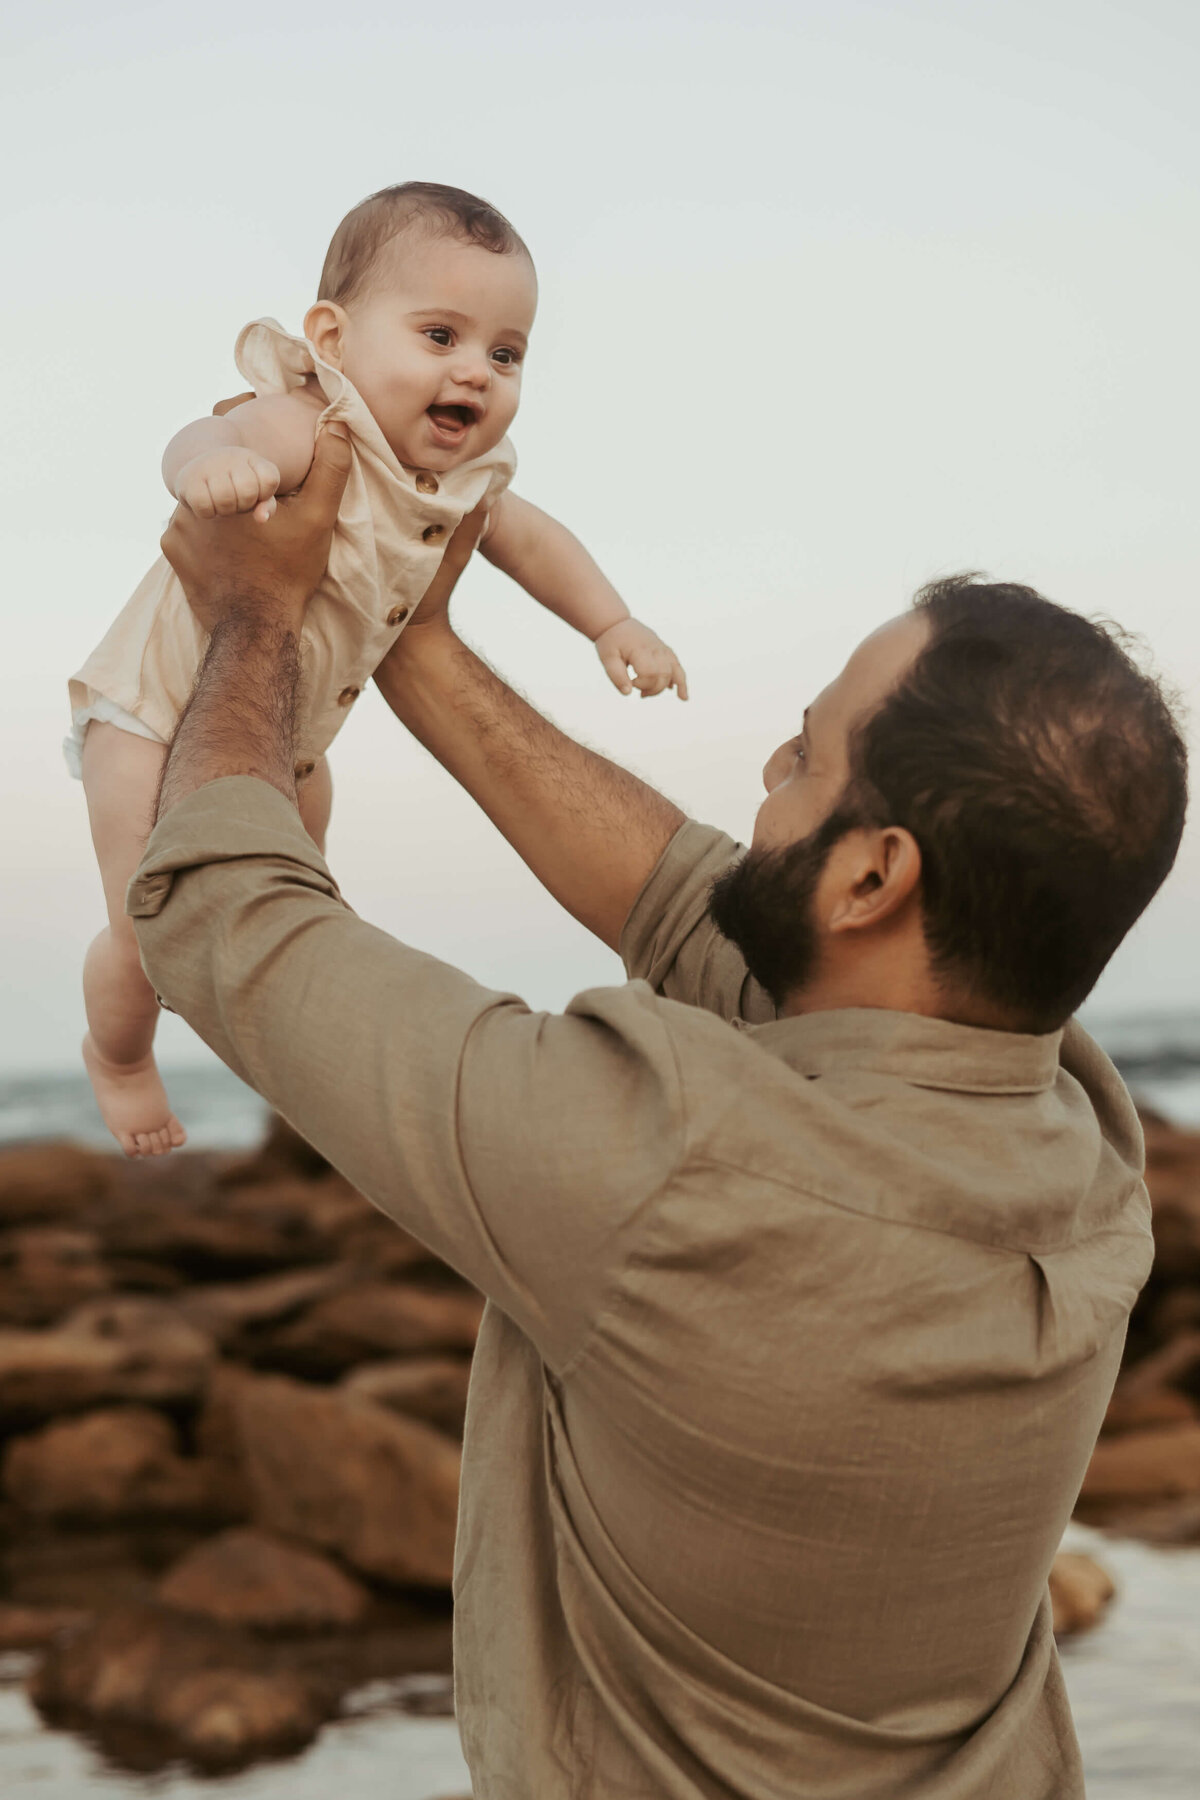 Dad has his back to the camera as he holds up his giggling baby during a beautiful beach sunset.